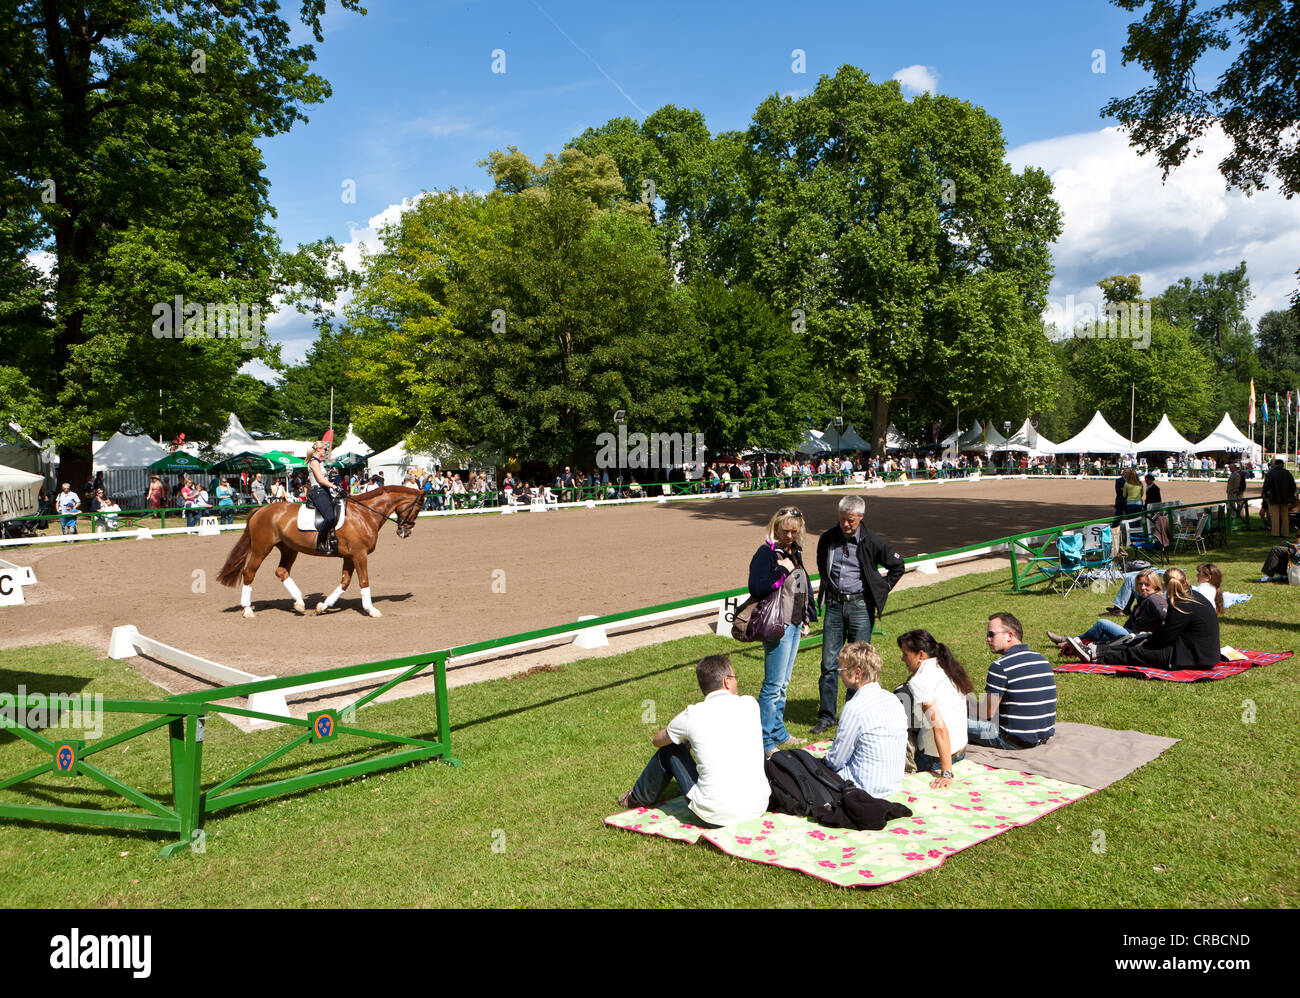 Spectators at the International Pentecostal show jumping and dressage competition, Schlosspark Biebrich palace gardens Stock Photo